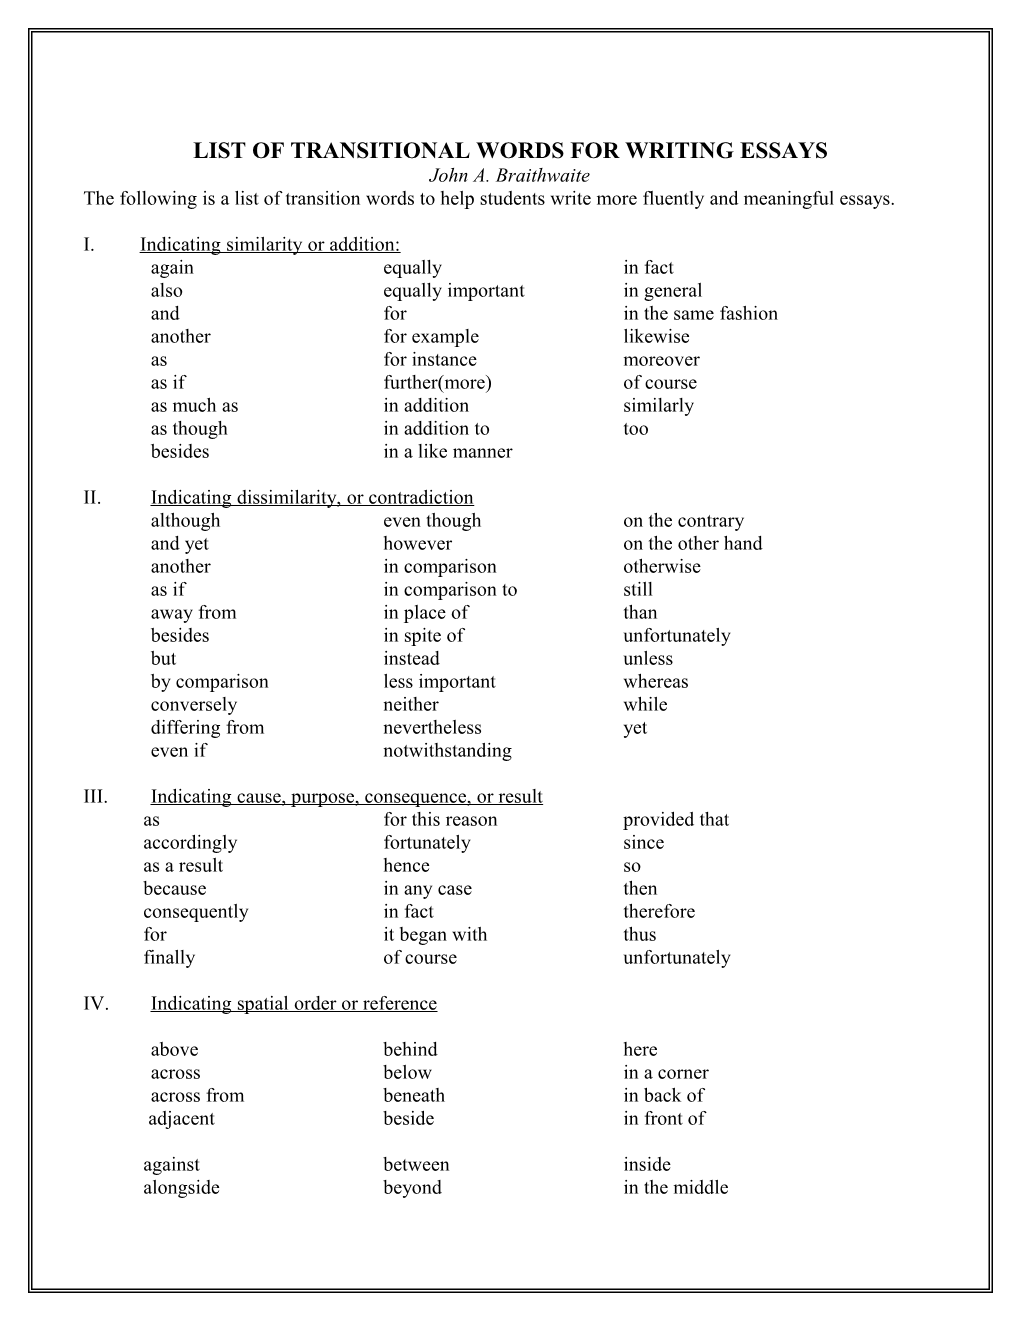 List of Transitional Words for Writing Essays